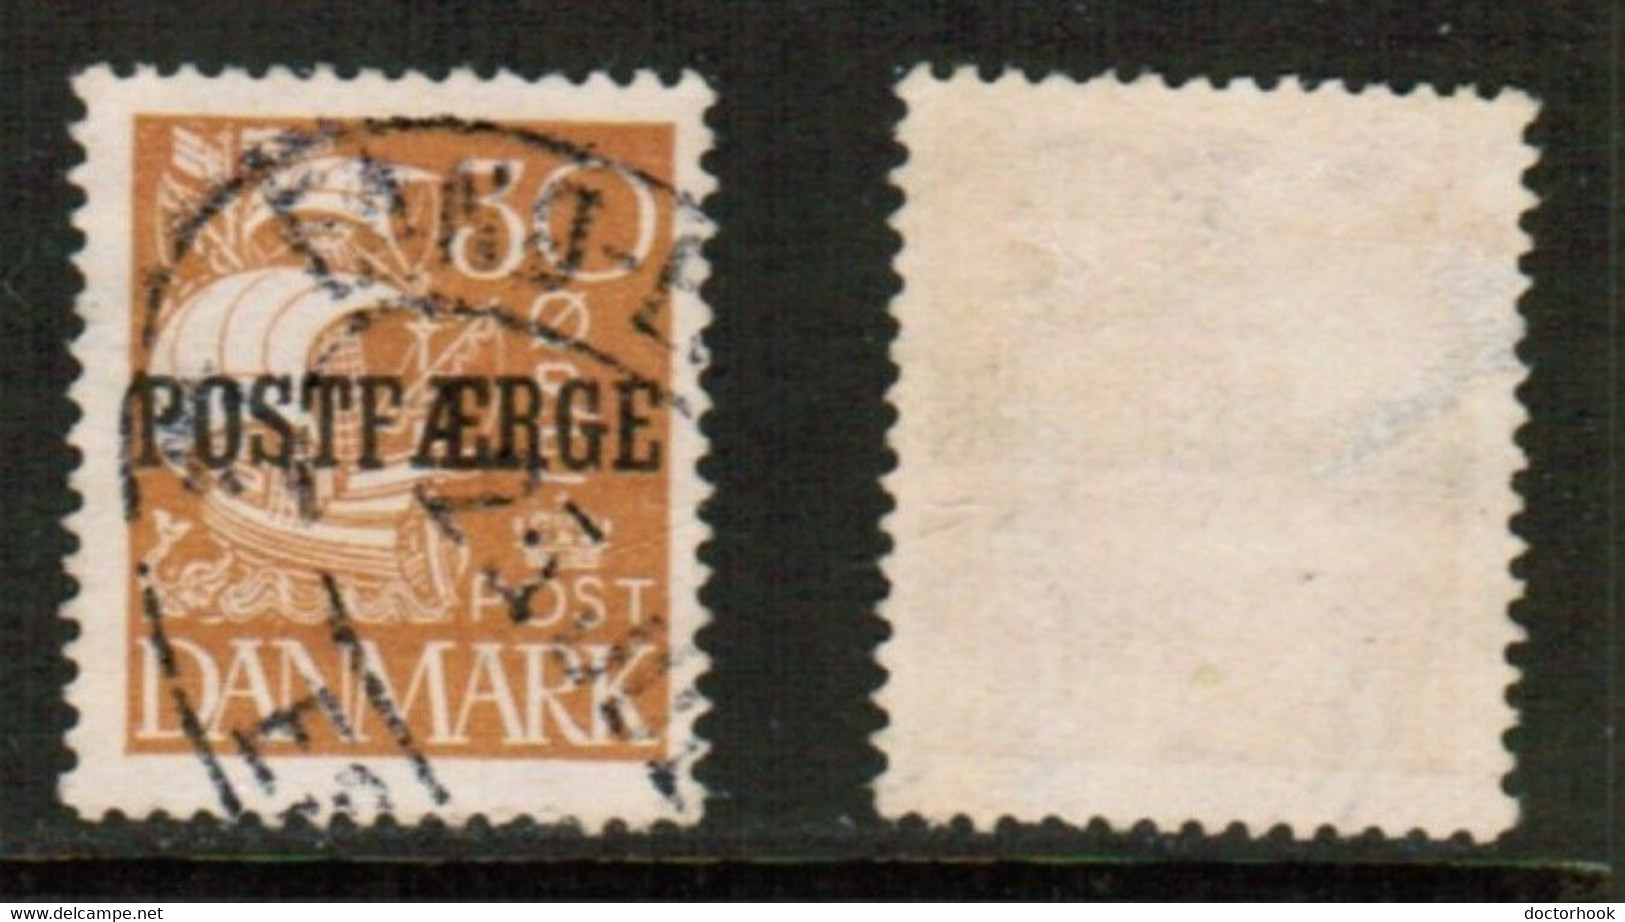 DENMARK   Scott # Q 13 USED (CONDITION AS PER SCAN) (Stamp Scan # 864-10) - Parcel Post